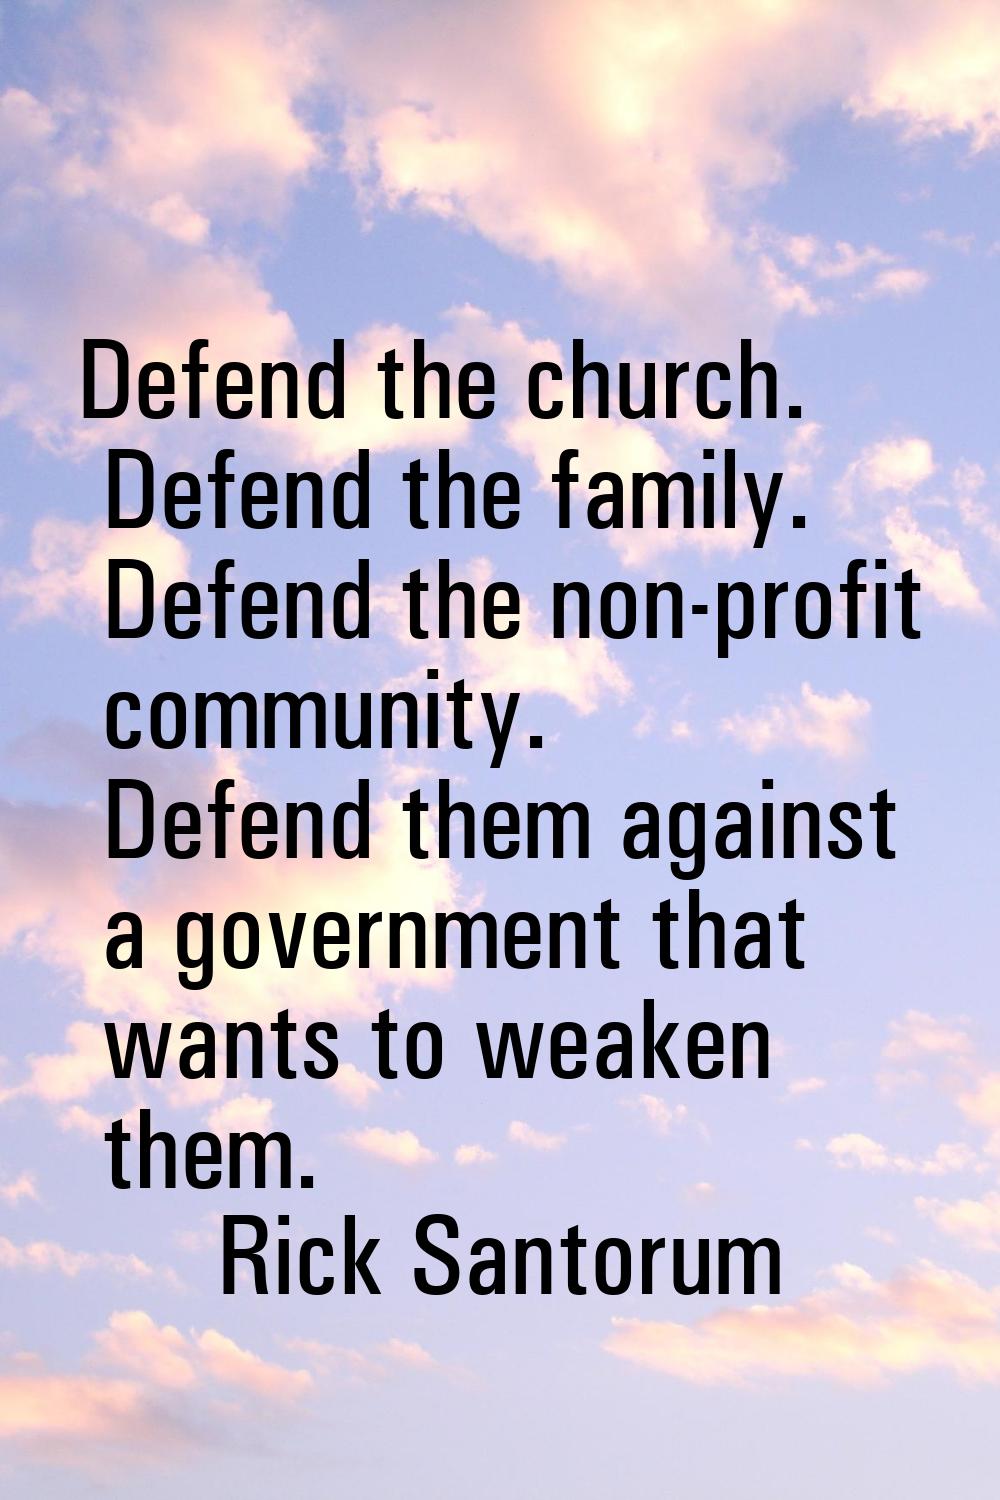 Defend the church. Defend the family. Defend the non-profit community. Defend them against a govern